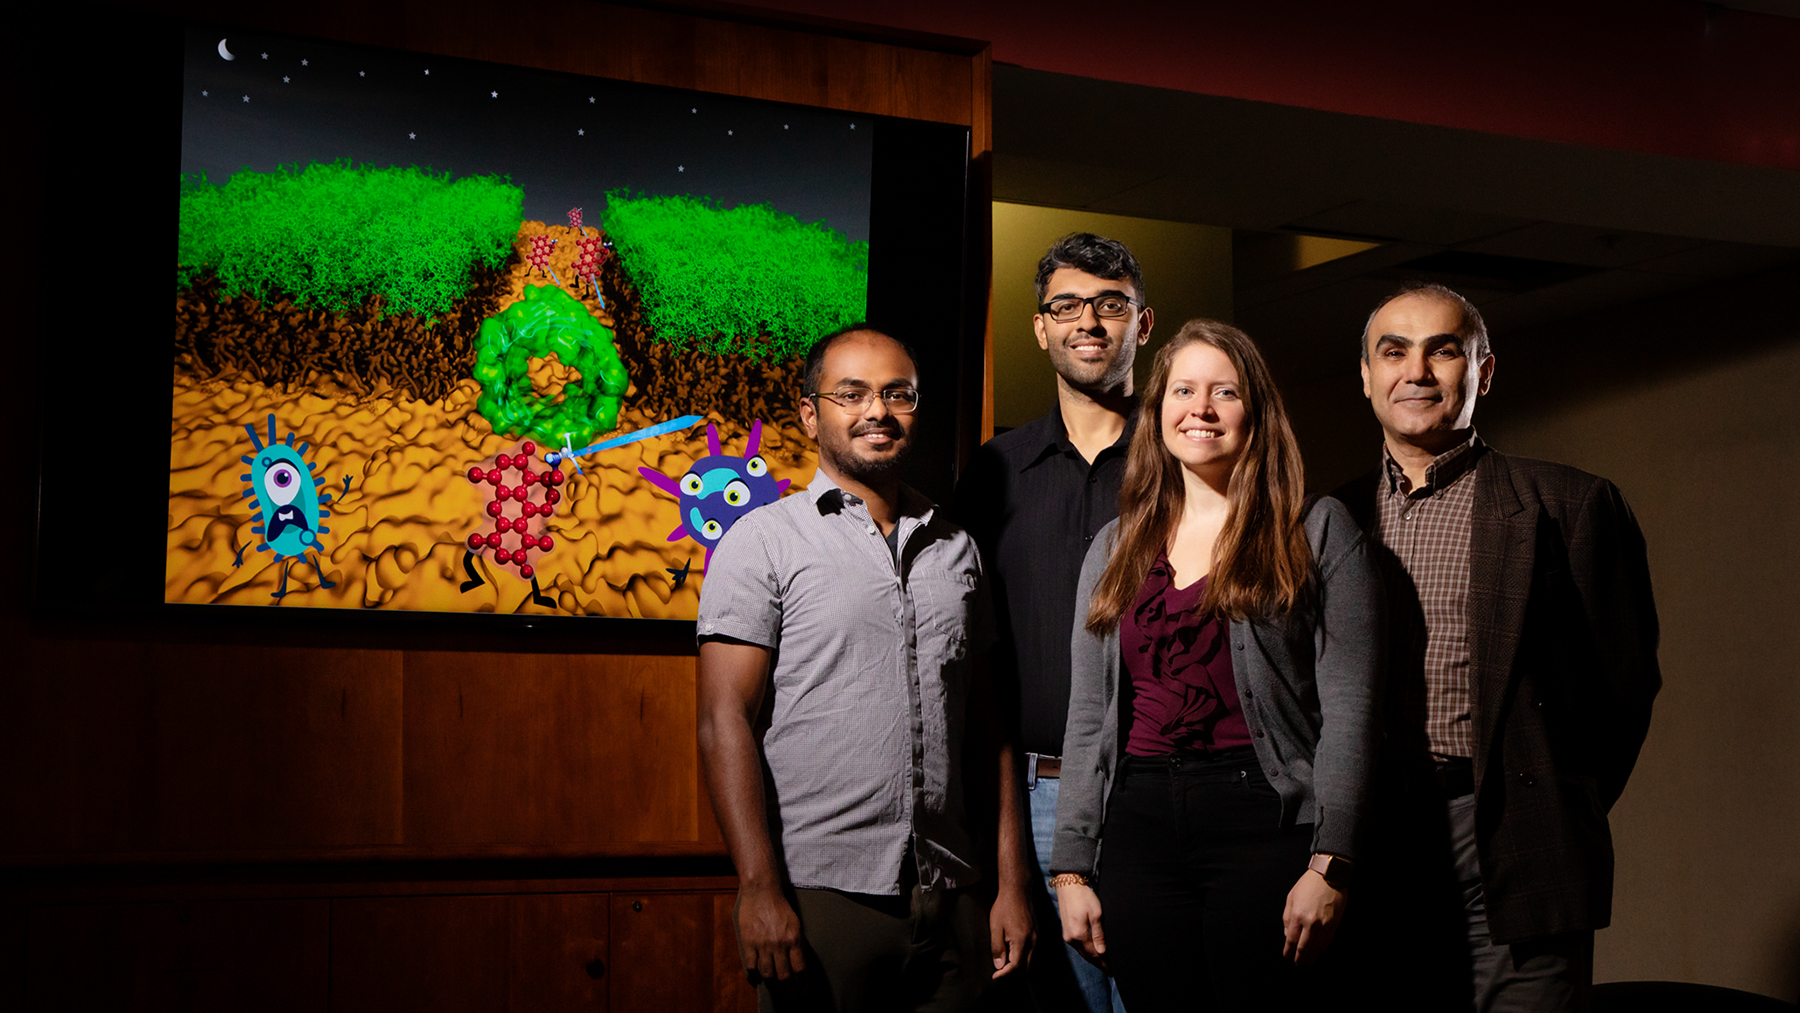 The research team, including, from left, Nandan Haloi, Archit Kumar Vasan, Emily Geddes and Emad Tajkhorshid. Photo by Brian Stauffer